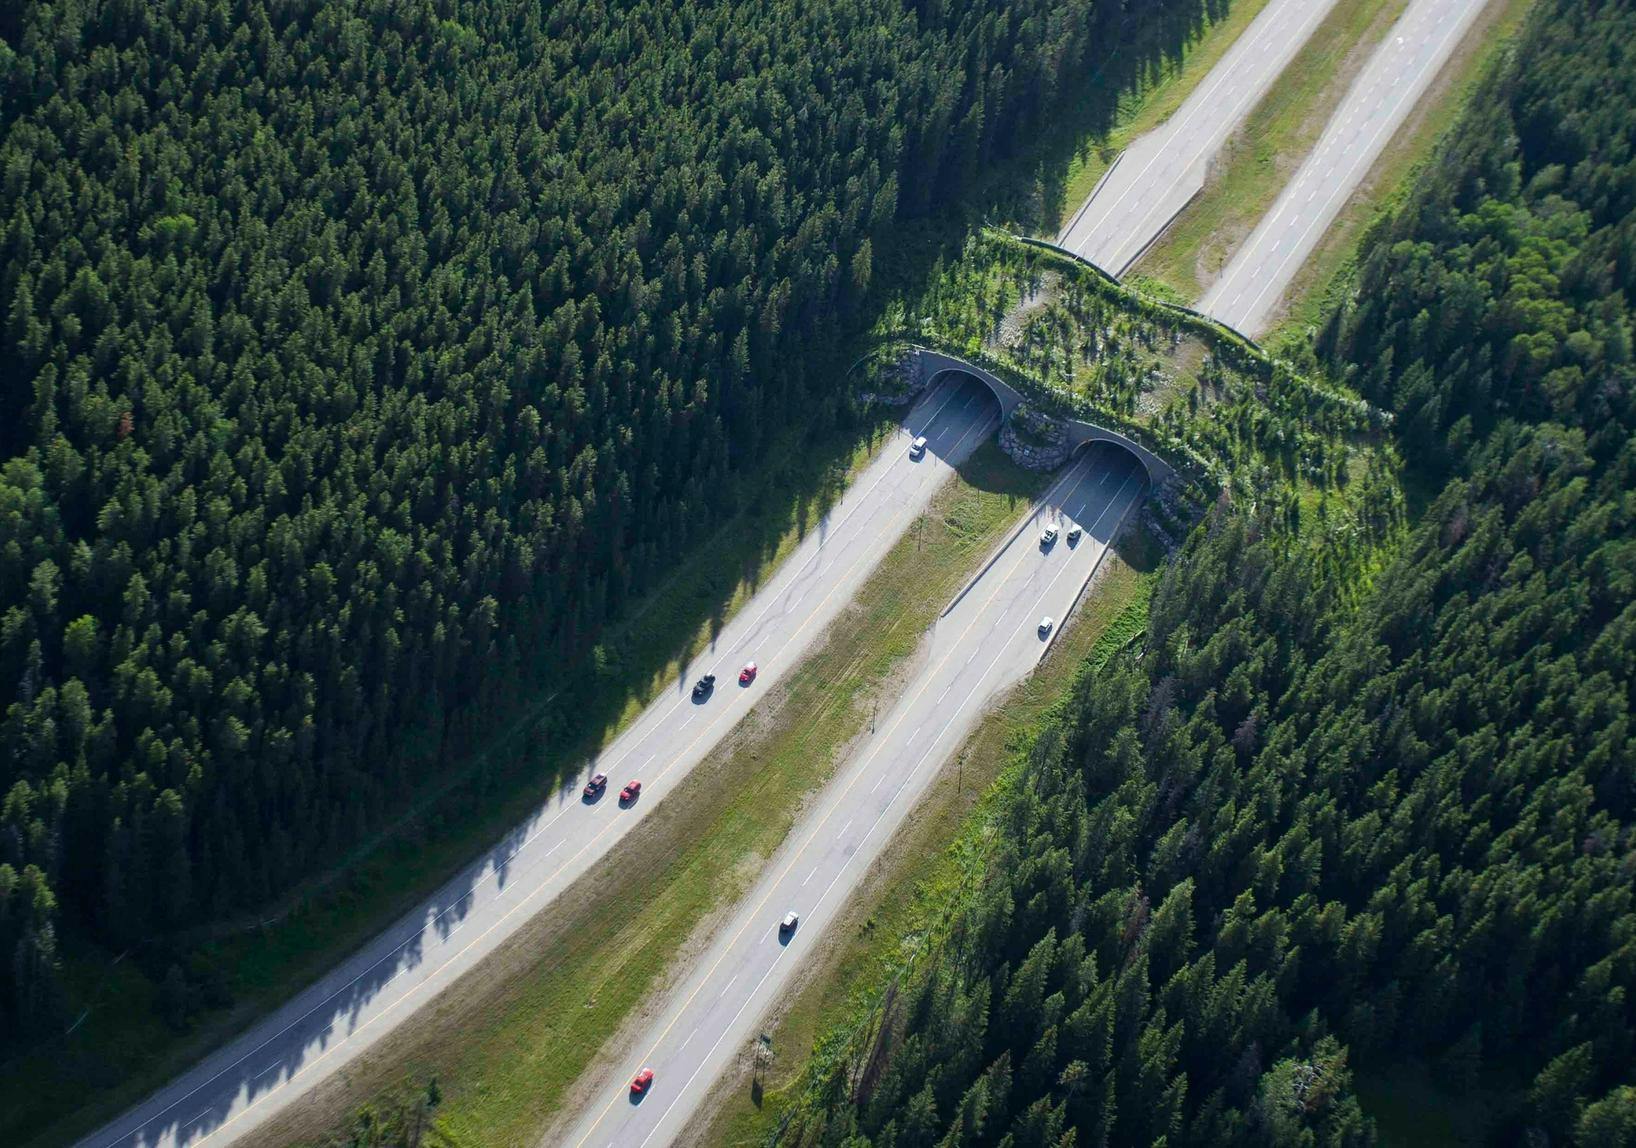 A wildlife overpass on Highway 1 in Banff National Park as seen from an aerial view.